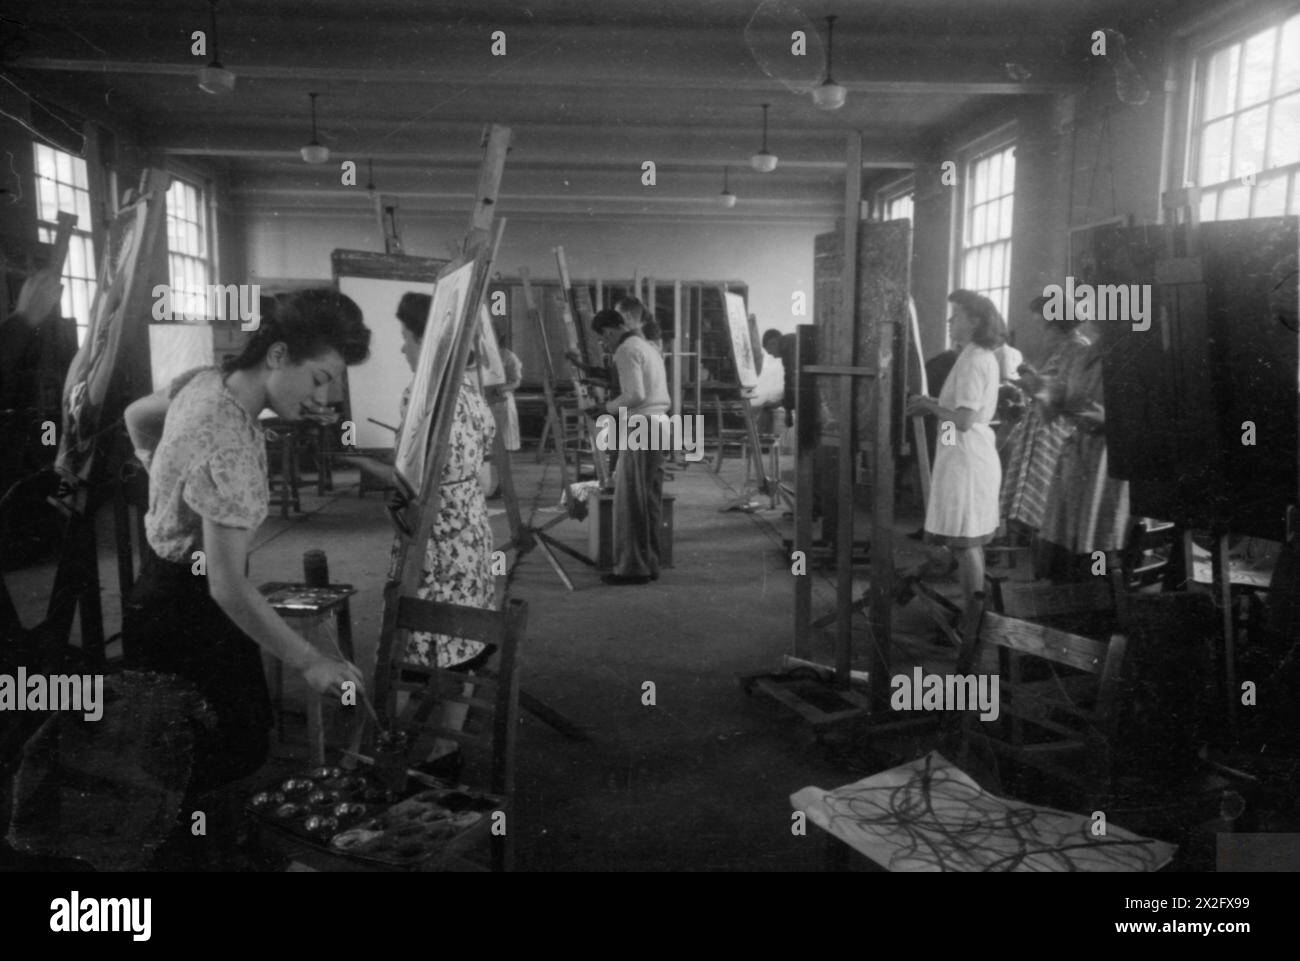 FROM THE SERVICES TO SCHOOLMASTERING: RE-TRAINING AT GOLDSMITH'S COLLEGE, LONDON UNIVERSITY, NOTTINGHAM, ENGLAND, 1944 - Two of the 28 ex-servicemen training to be teachers at Goldsmiths College (based at Nottingham University since the outbreak of war) are training to have art as their main subject. Here they can be seen taking part in an art class at Nottingham University. The original caption makes much of the fact that most of the Nottingham art students are women : 'as the photographer clicks the shutter one [of the men] says 'This'll make the boys jealous'' Stock Photo